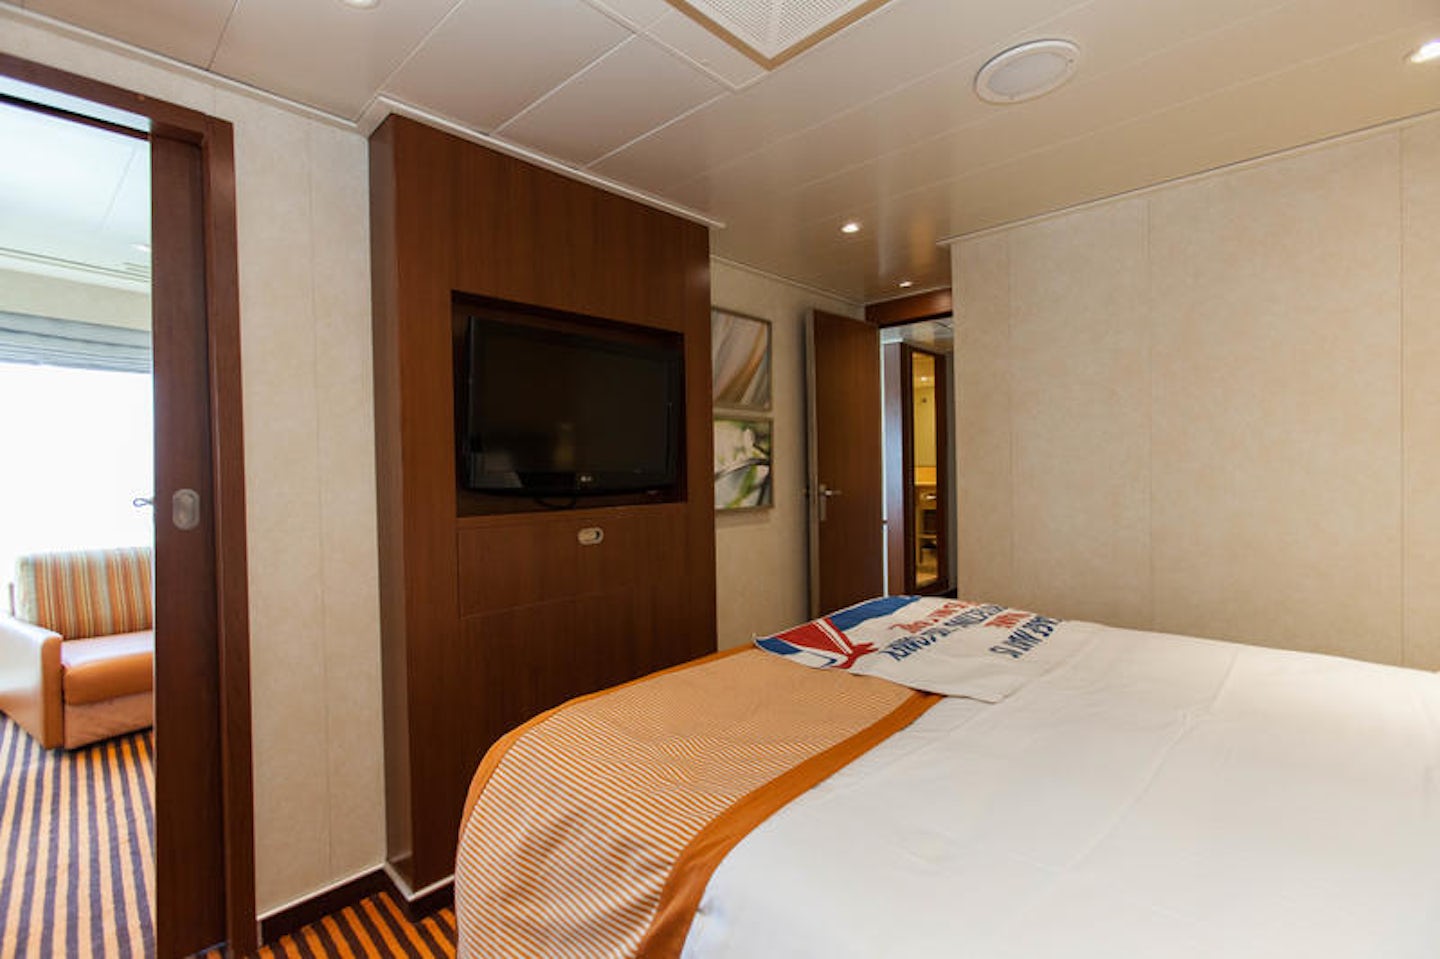 The Captain's Suite on Carnival Valor